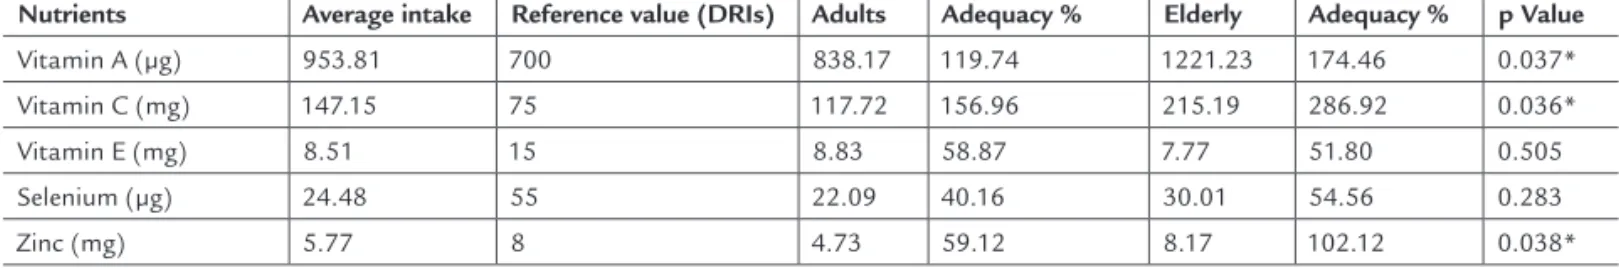 TABLE 2   Adequacy of dietary intake of antioxidants and comparison between age groups (n=53)